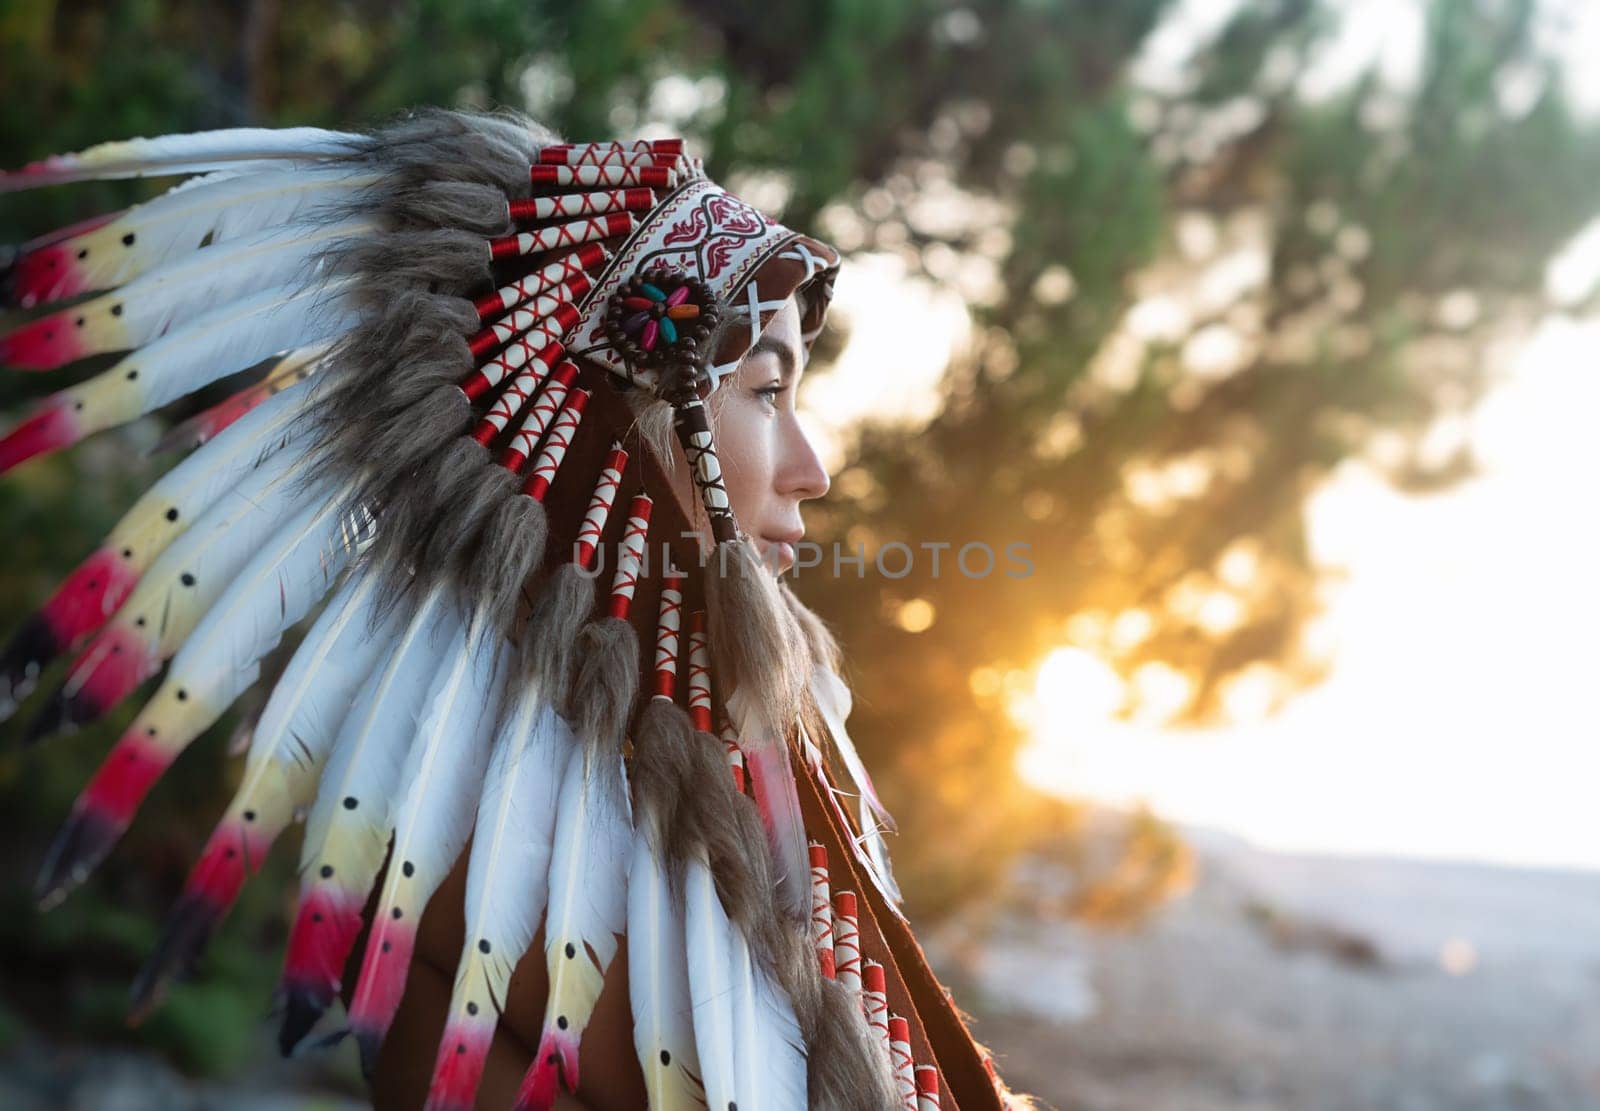 Portrait of a girl with hands in Native American headdresses in nature in the sunset light